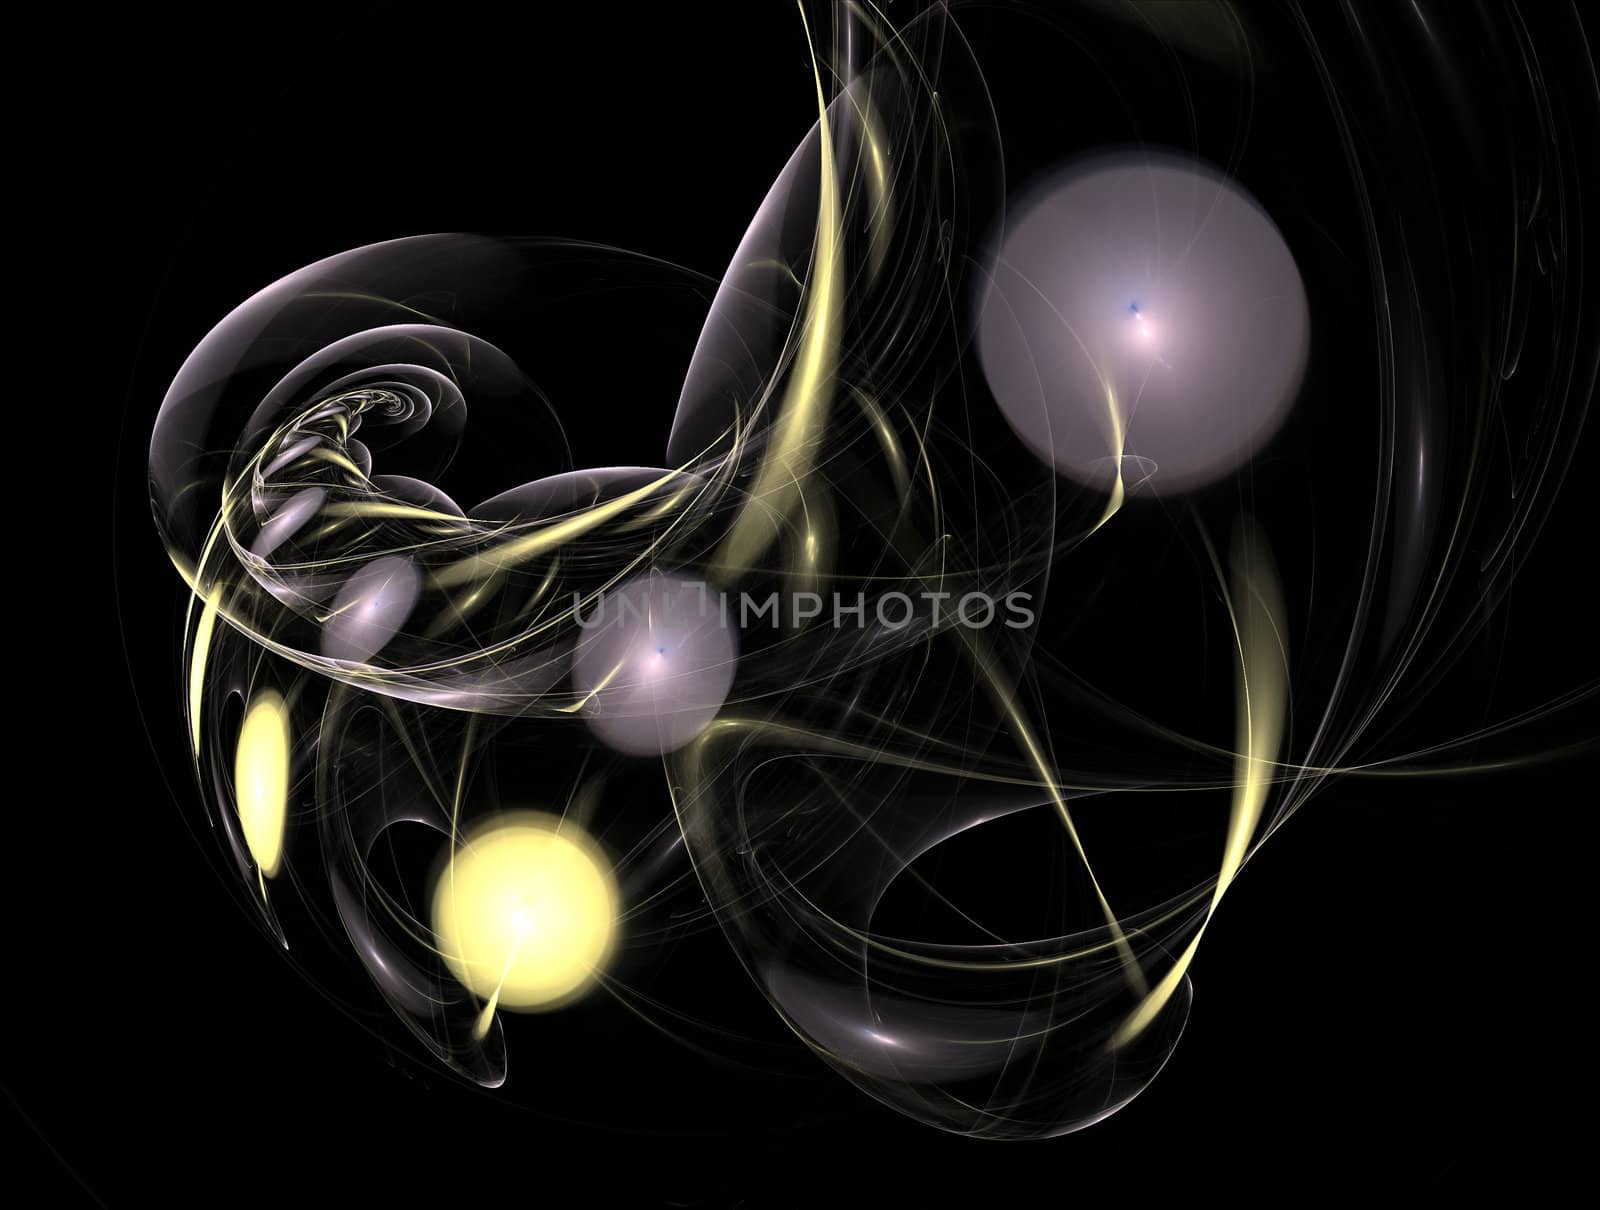 A fractal generated in Apophysis and edited in Photoshop.